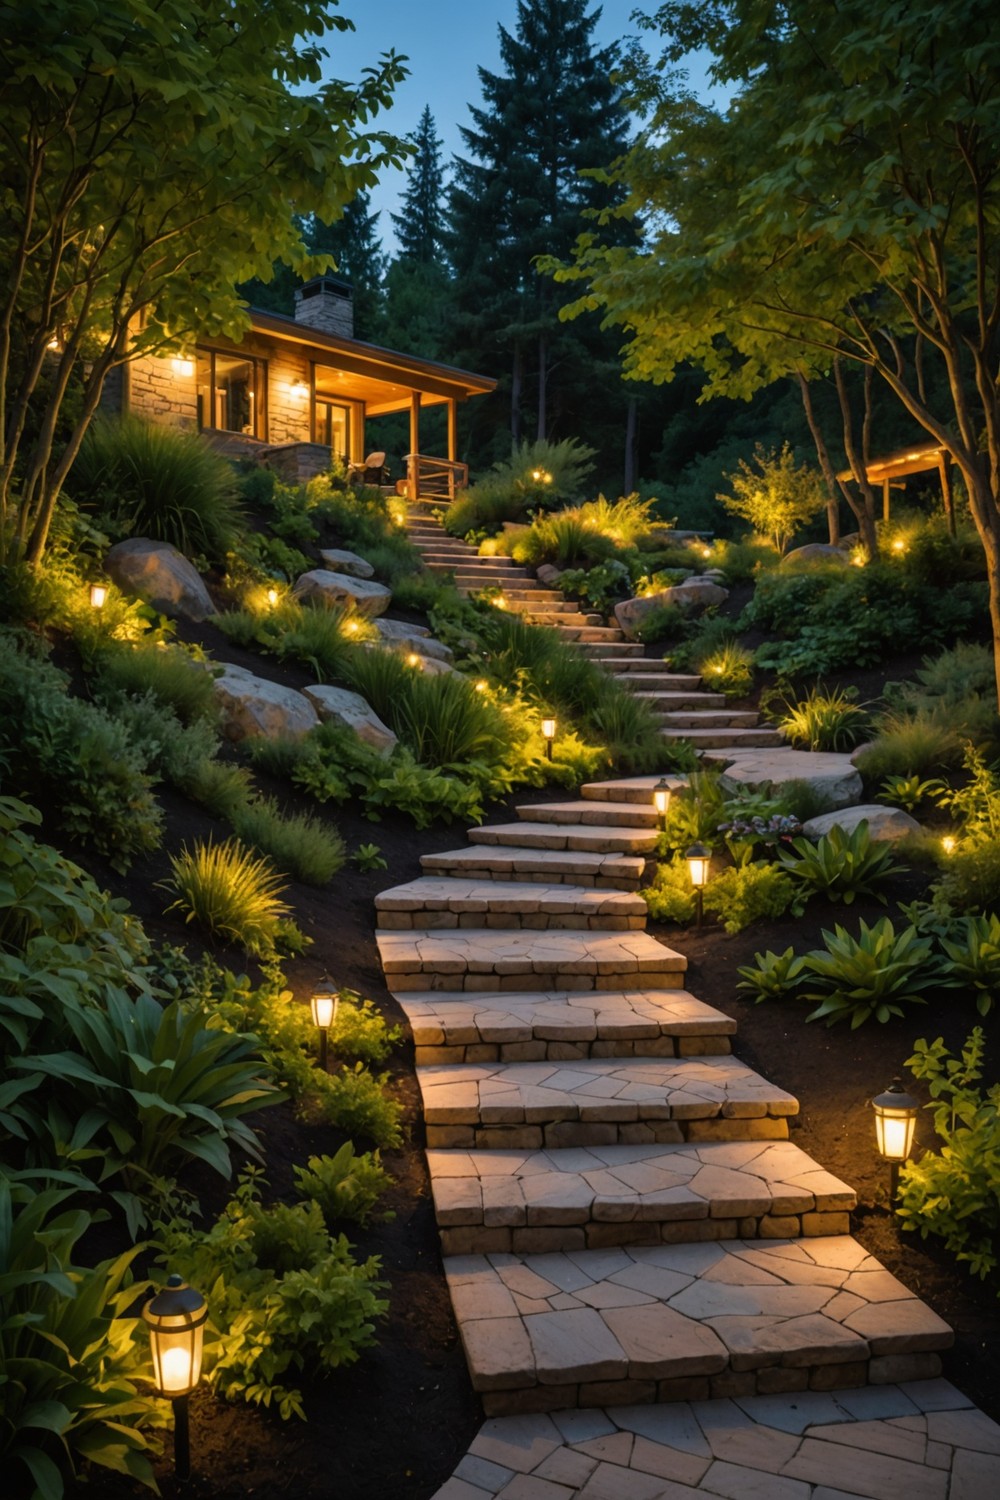 Hillside Lighting for Safety and Ambiance